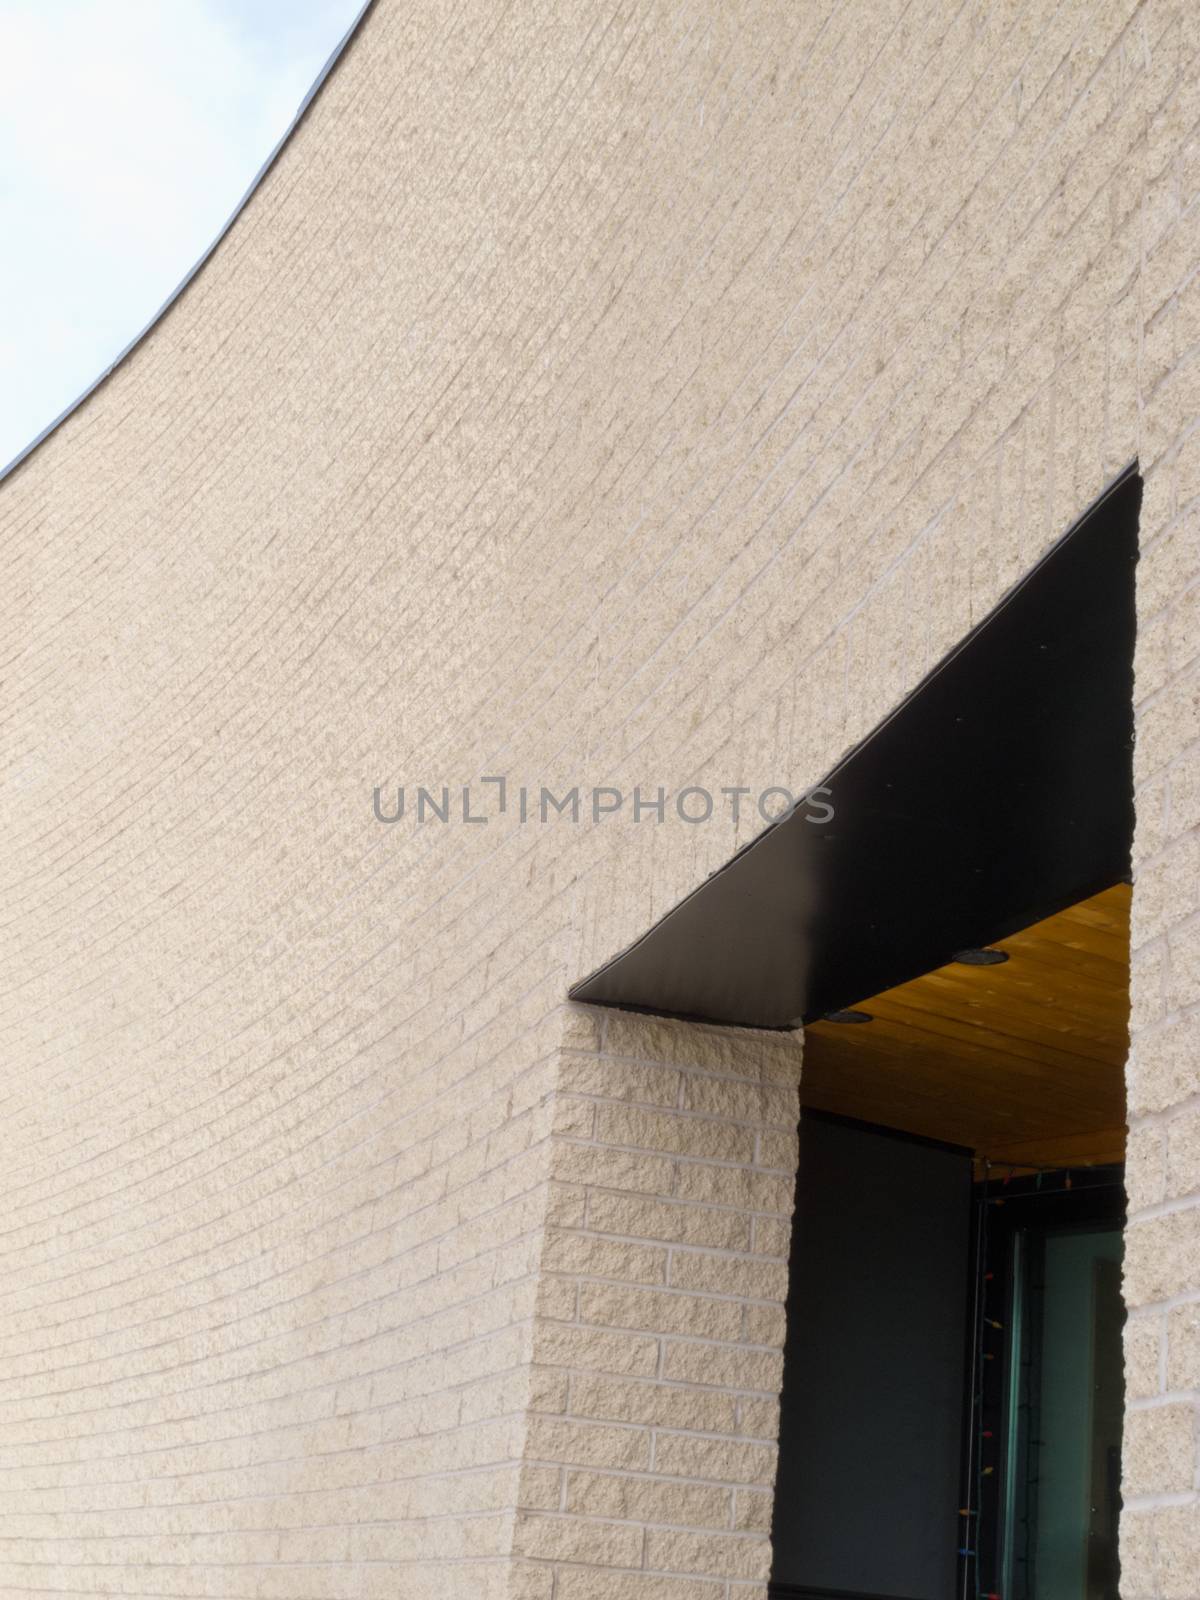 Empty curved masonry exterior wall and entrance opening building architecture